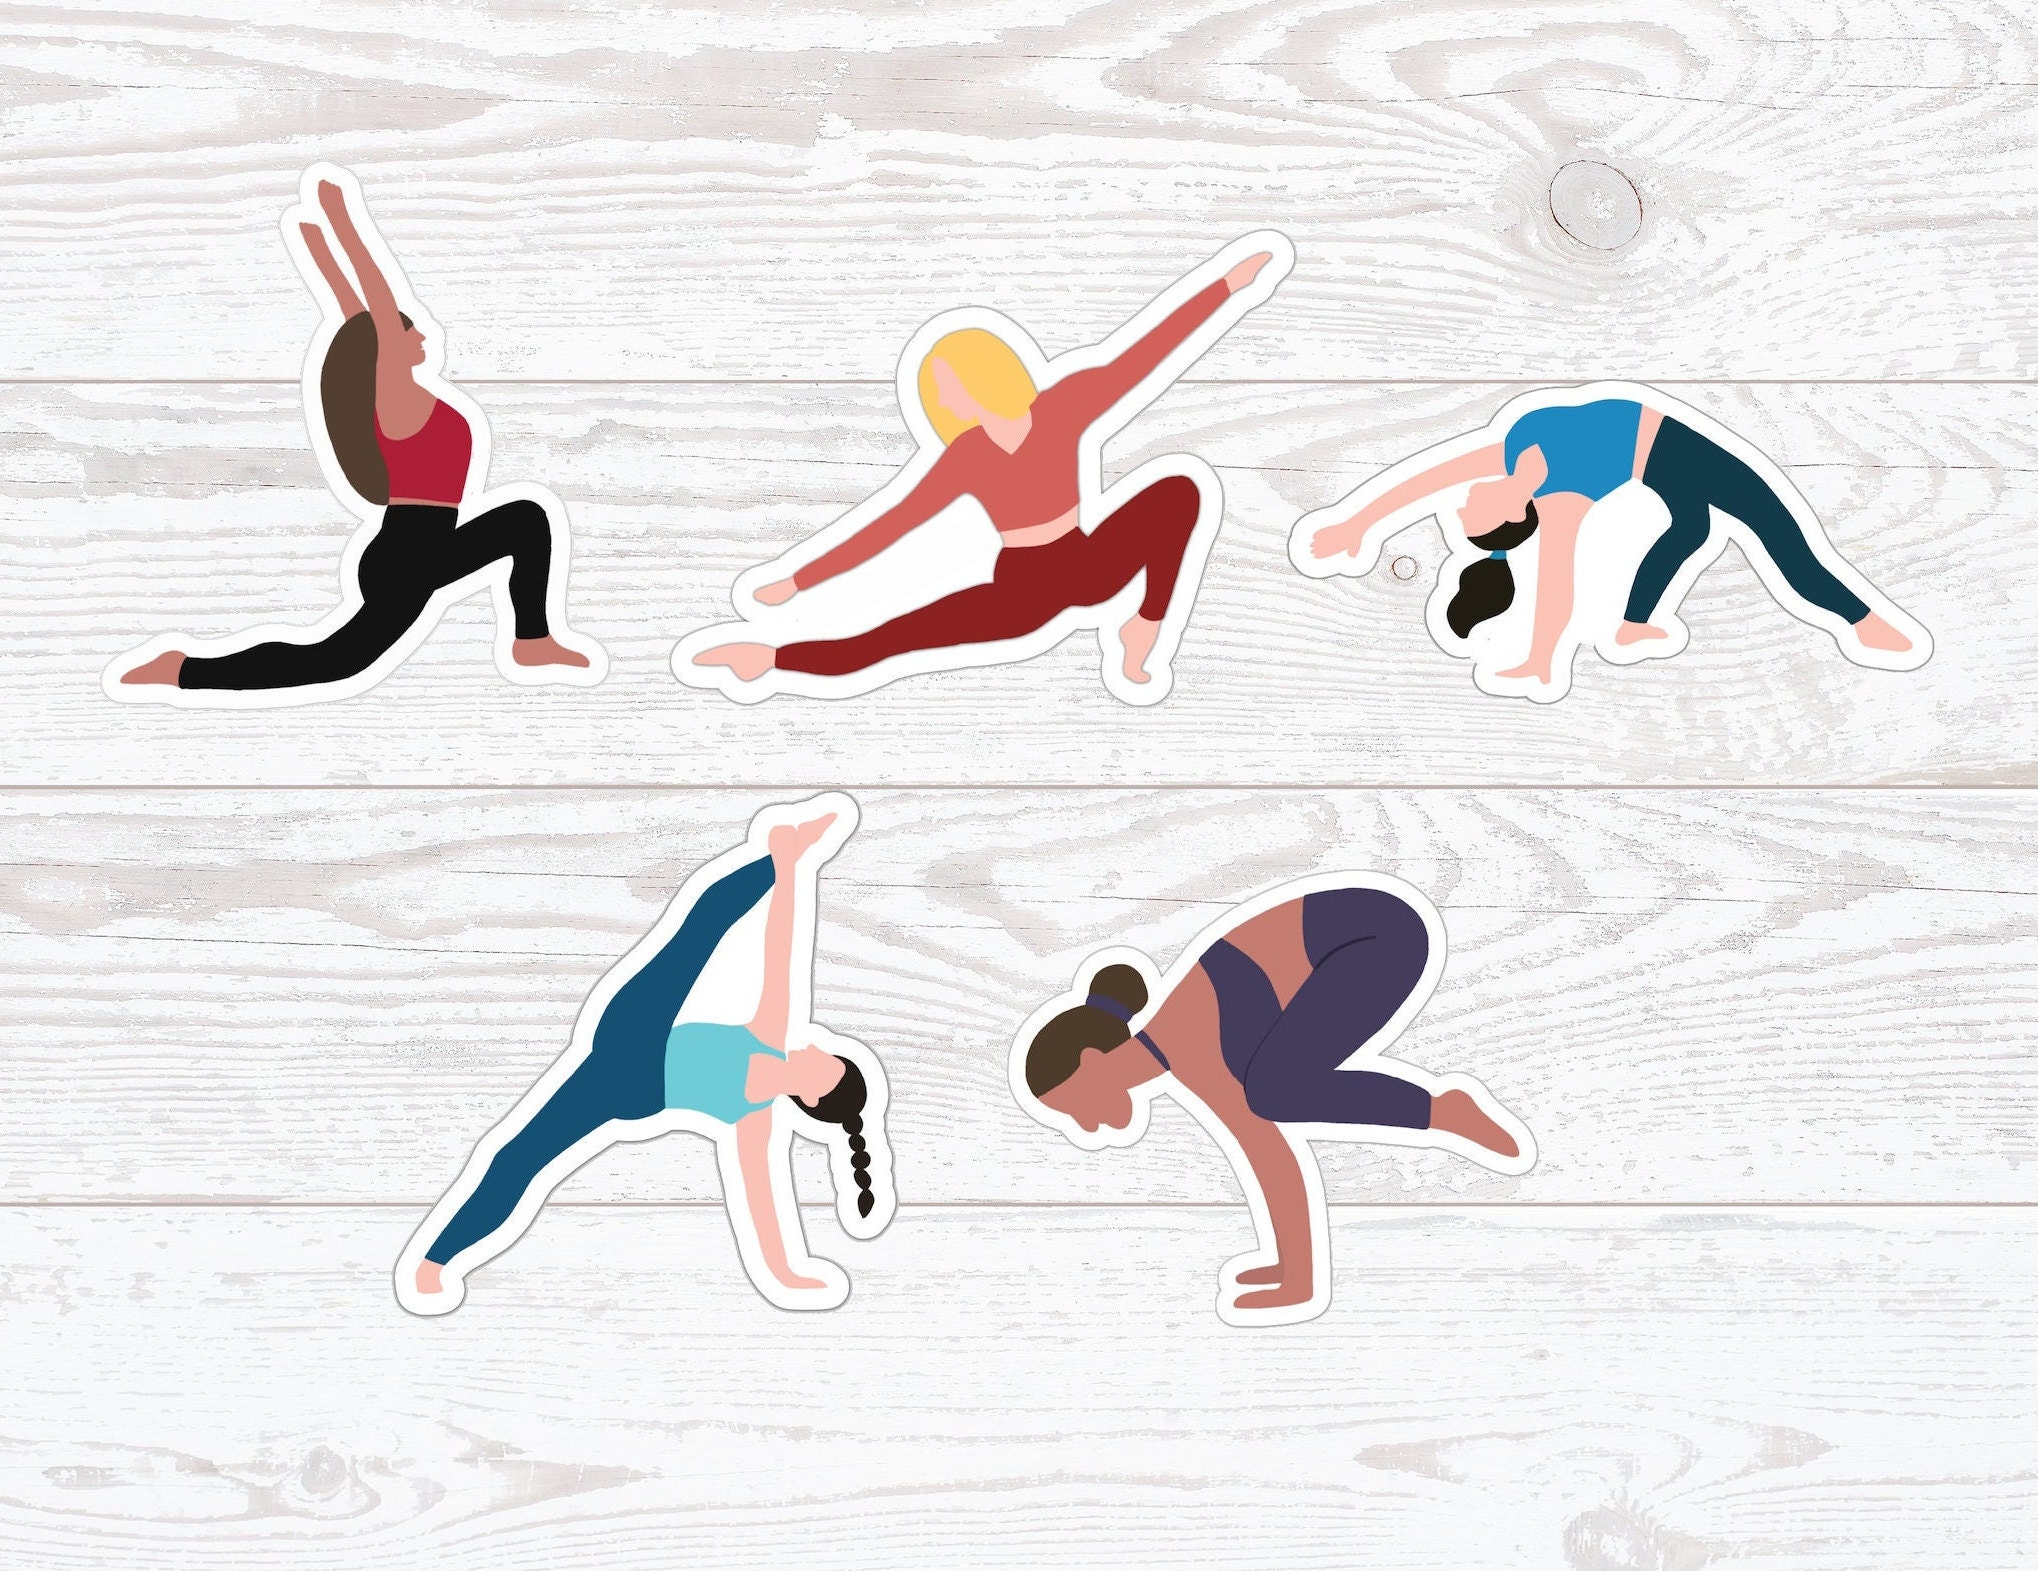 Yoga Poses Stickers, Yoga Stickers, Meditation, Fitness, Exercise, Zen,  Namaste, Vinyl Stickers, Yoga Decal, Die Cut Stickers, Yoga Lovers, 